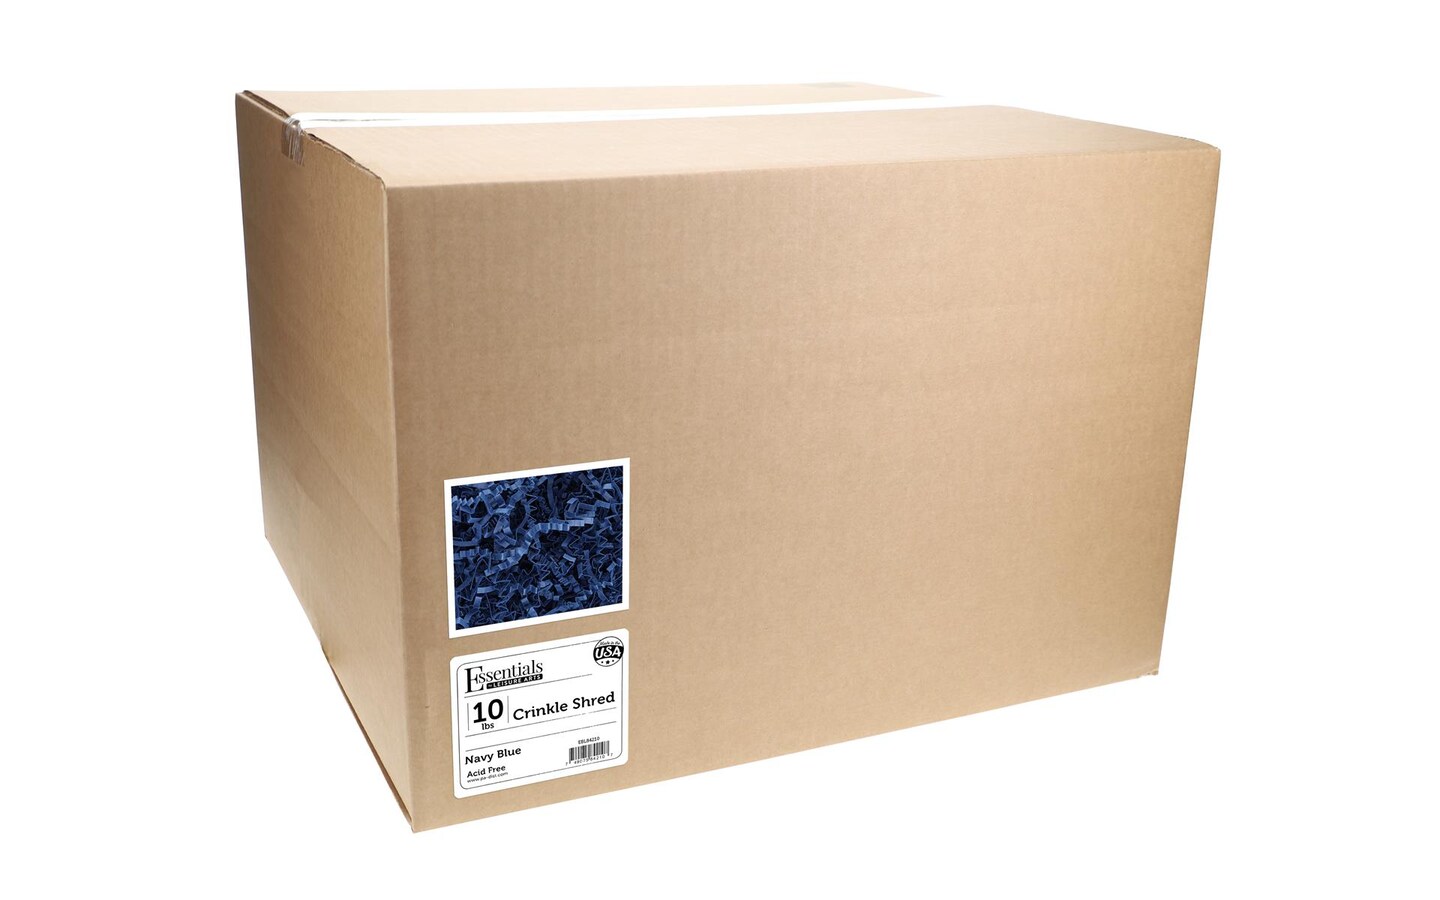 Essentials by Leisure Arts Crinkle Shred Box, Navy Blue, 10lbs Shredded Paper Filler, Crinkle Cut Paper Shred Filler, Box Filler, Shredded Paper for Gift Box, Paper Crinkle Filler, Box Filling